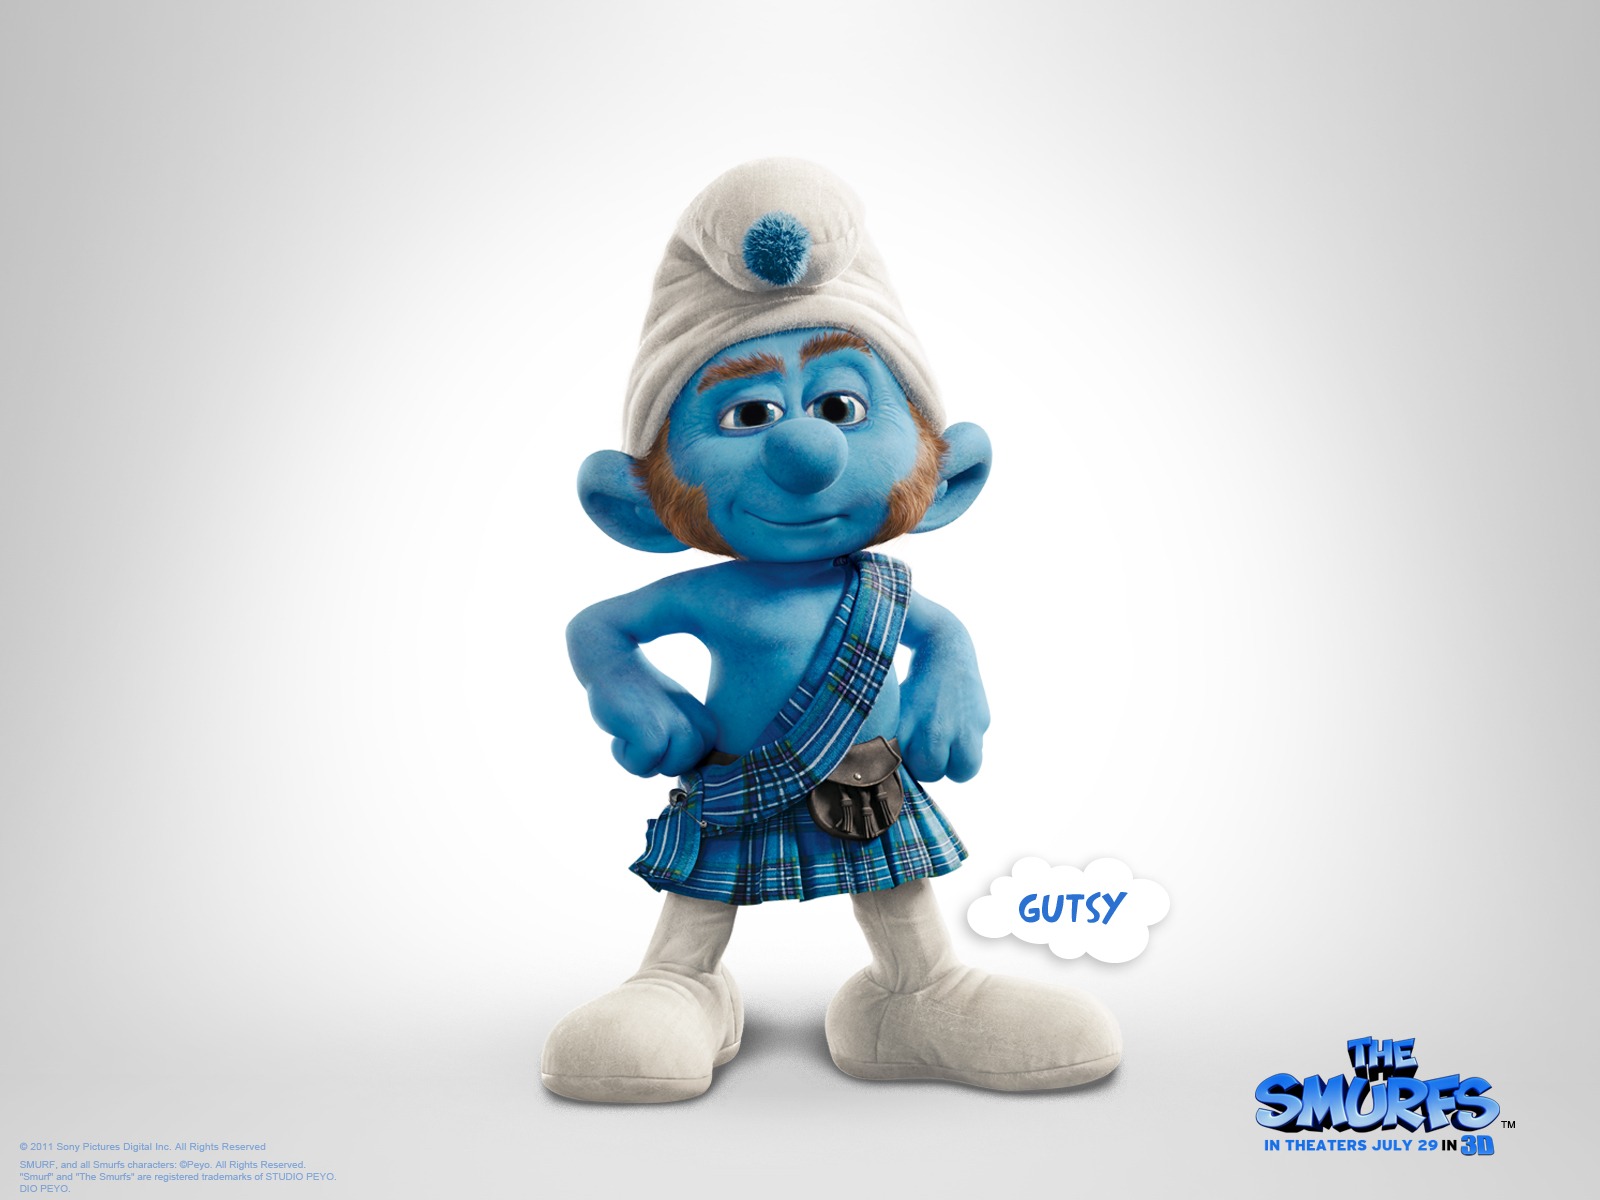 The Smurfs wallpapers #3 - 1600x1200